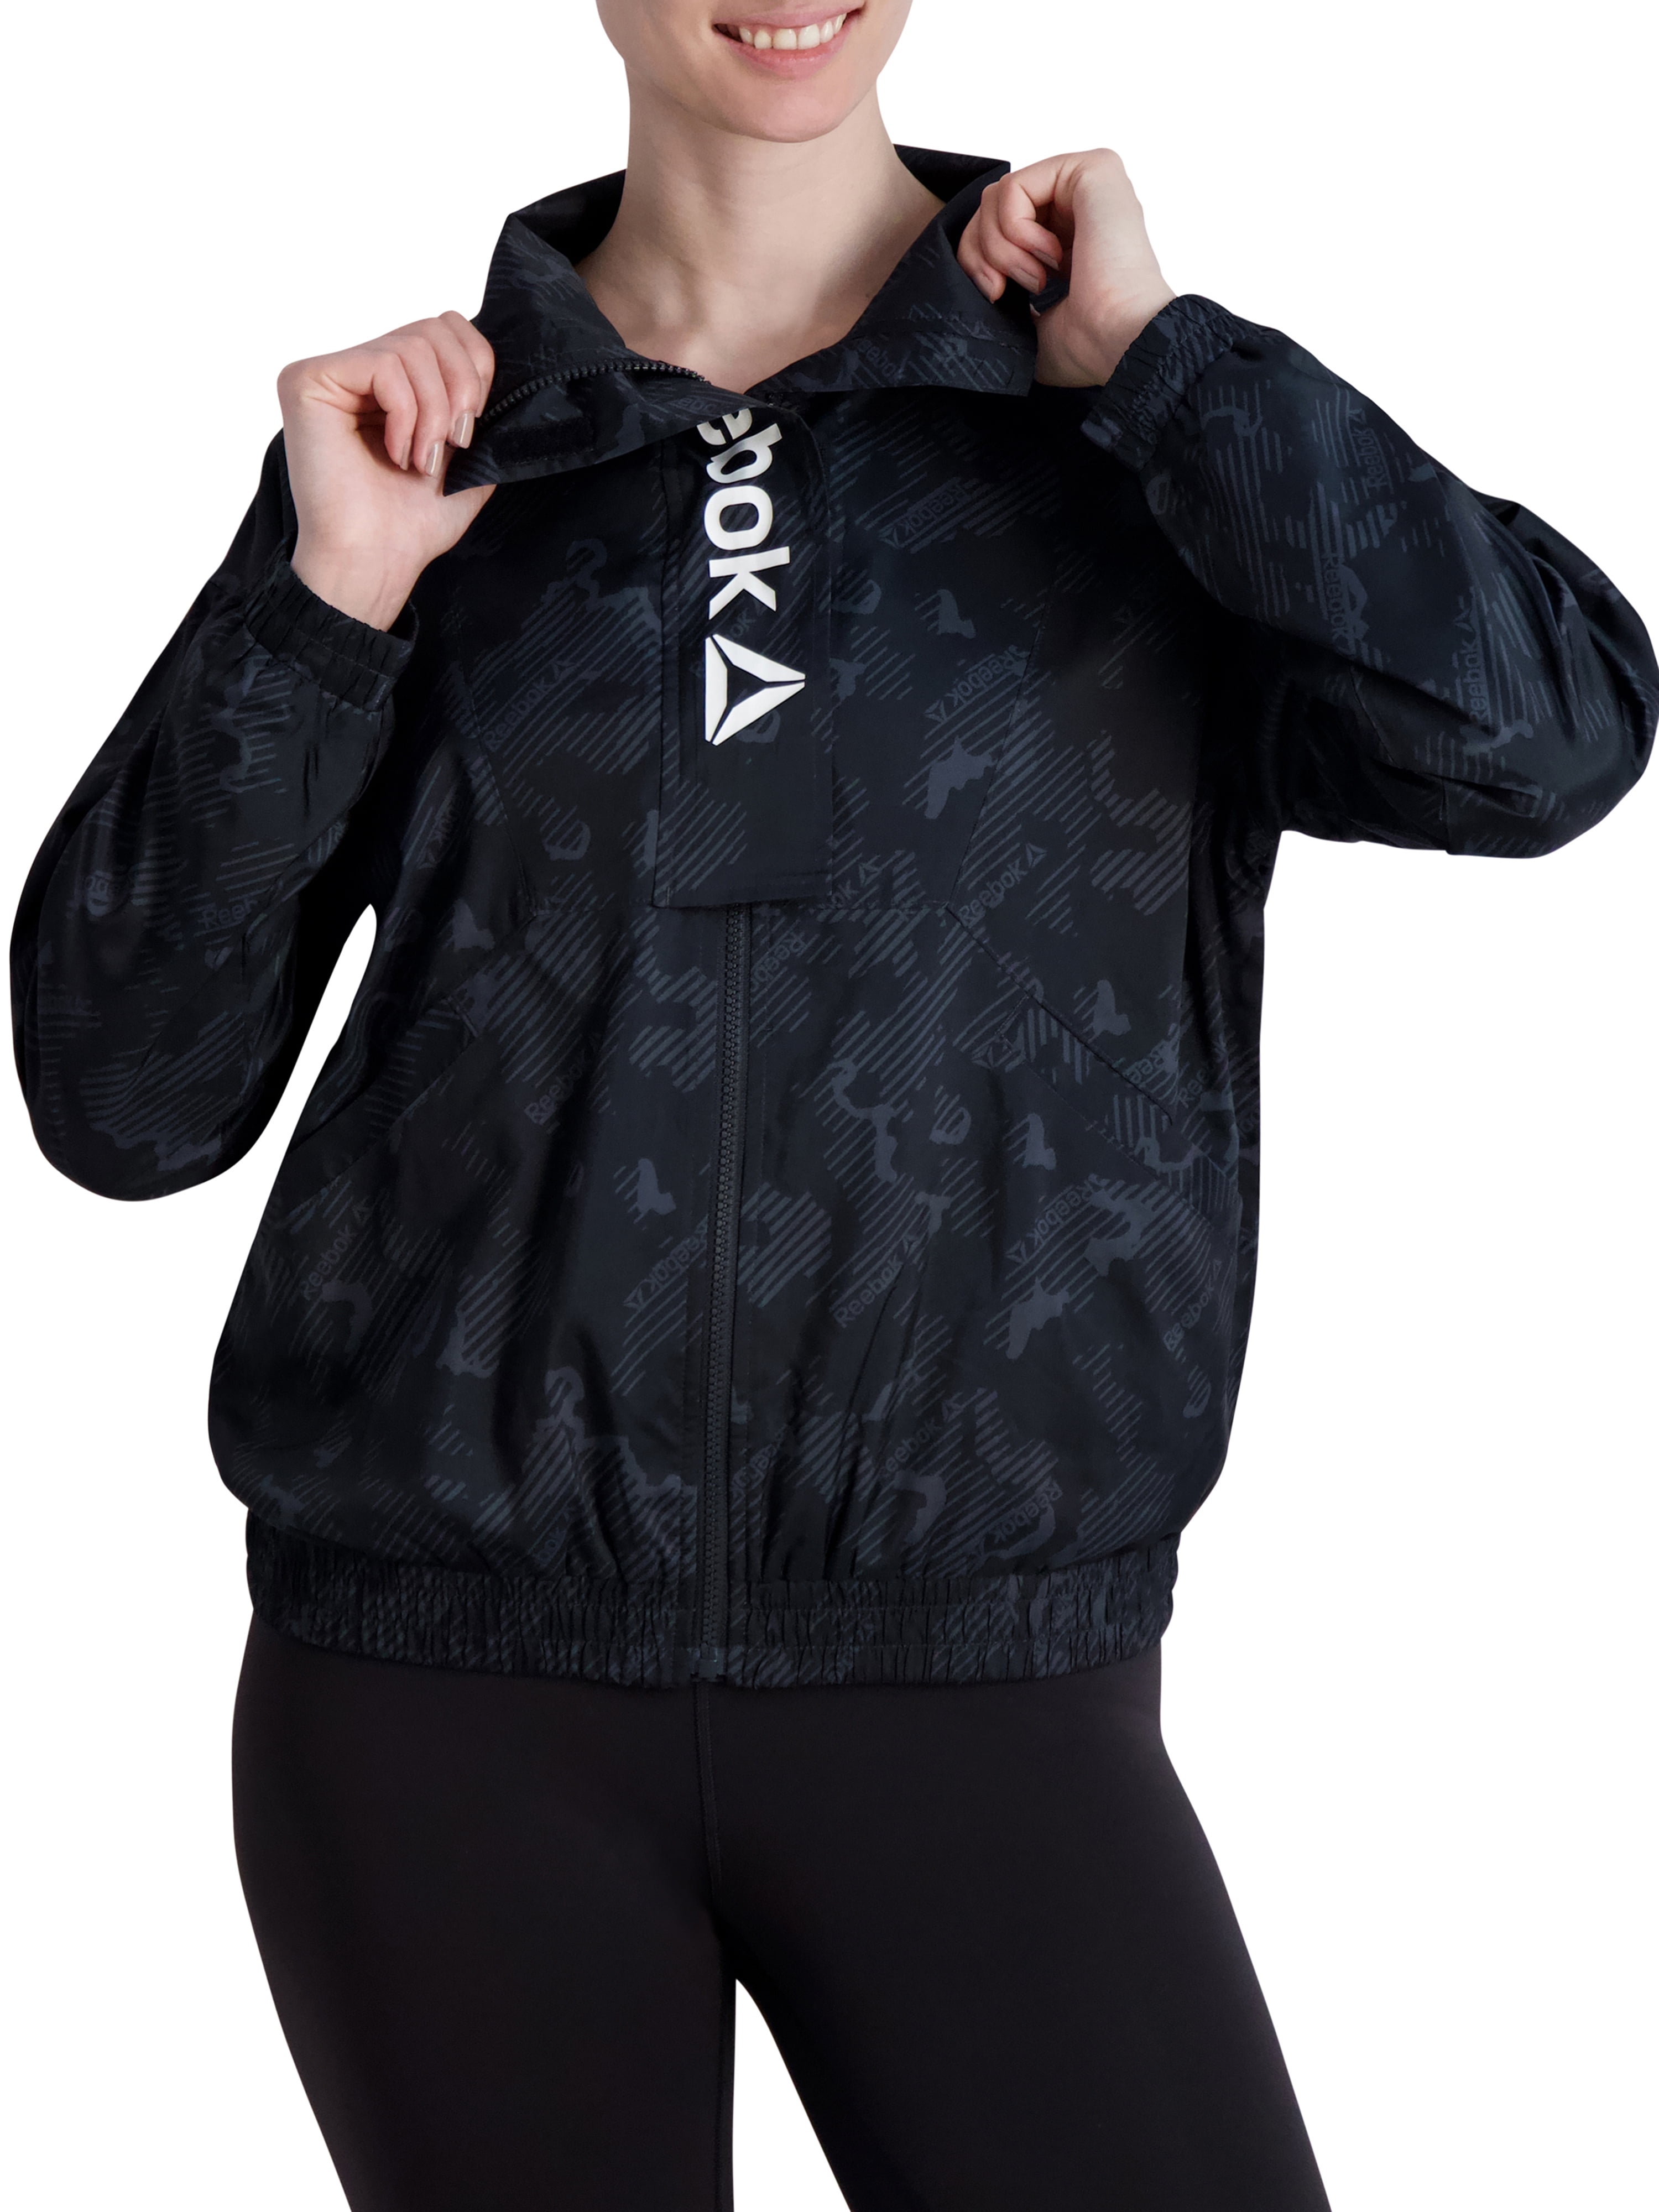 Reebok Women's Mesh Lined Printed Focus Track Jacket with Front Pockets and Front Flap